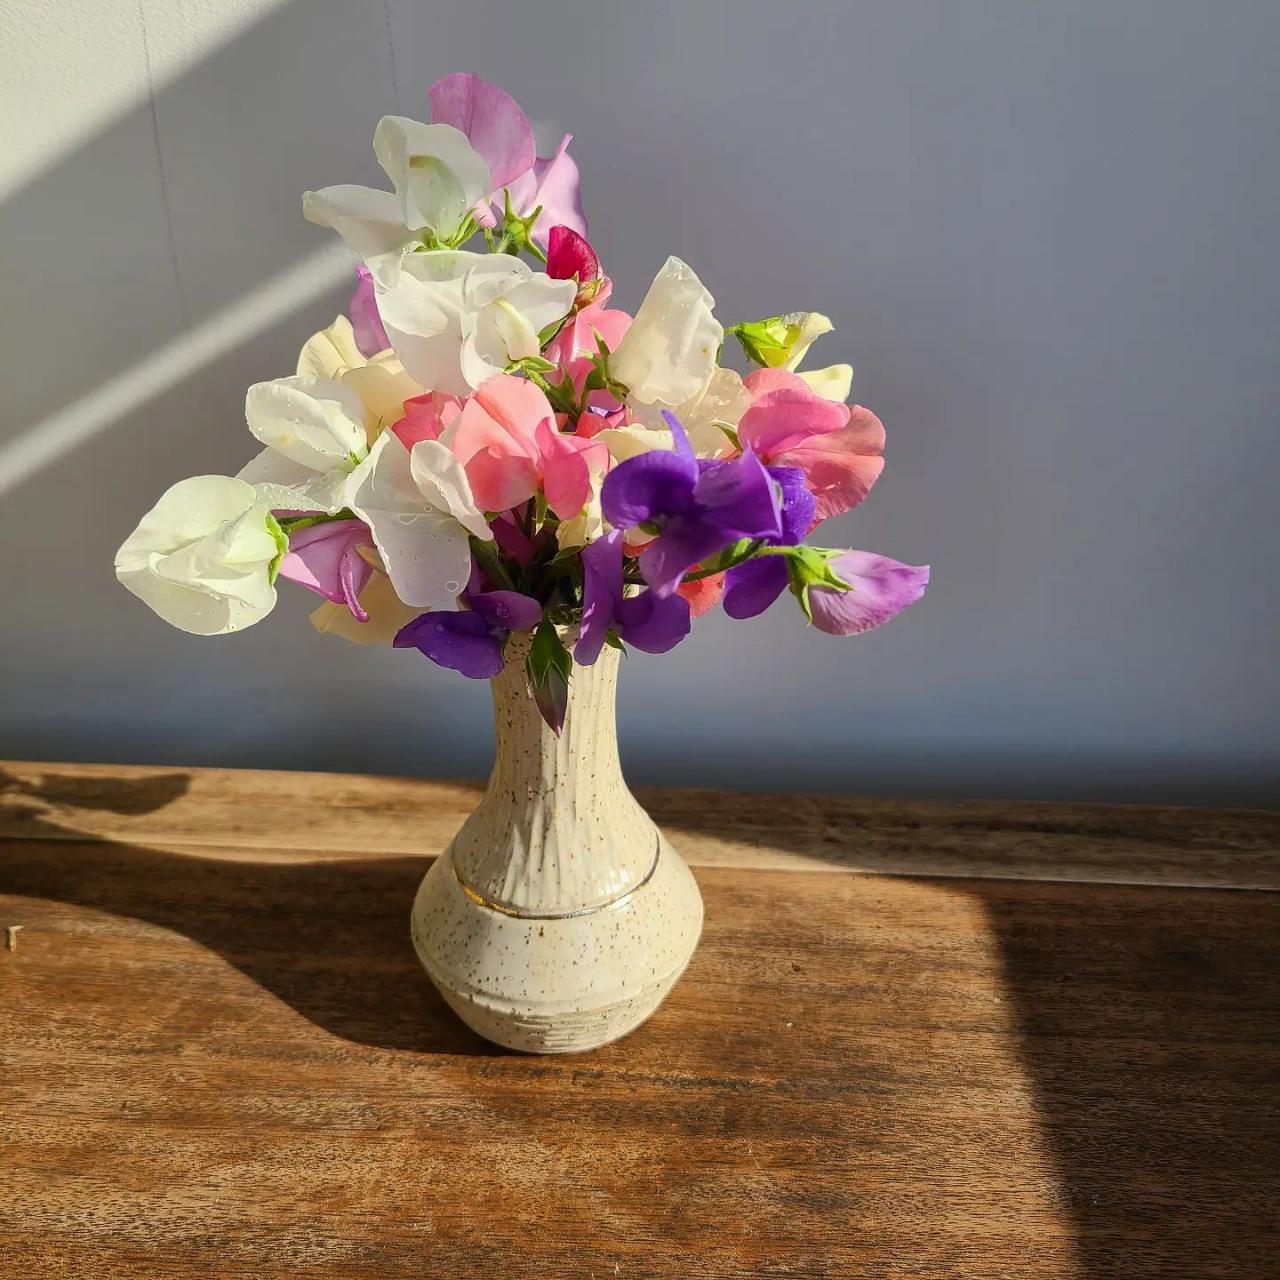 ceramic vase with pink, white, and purple flowers